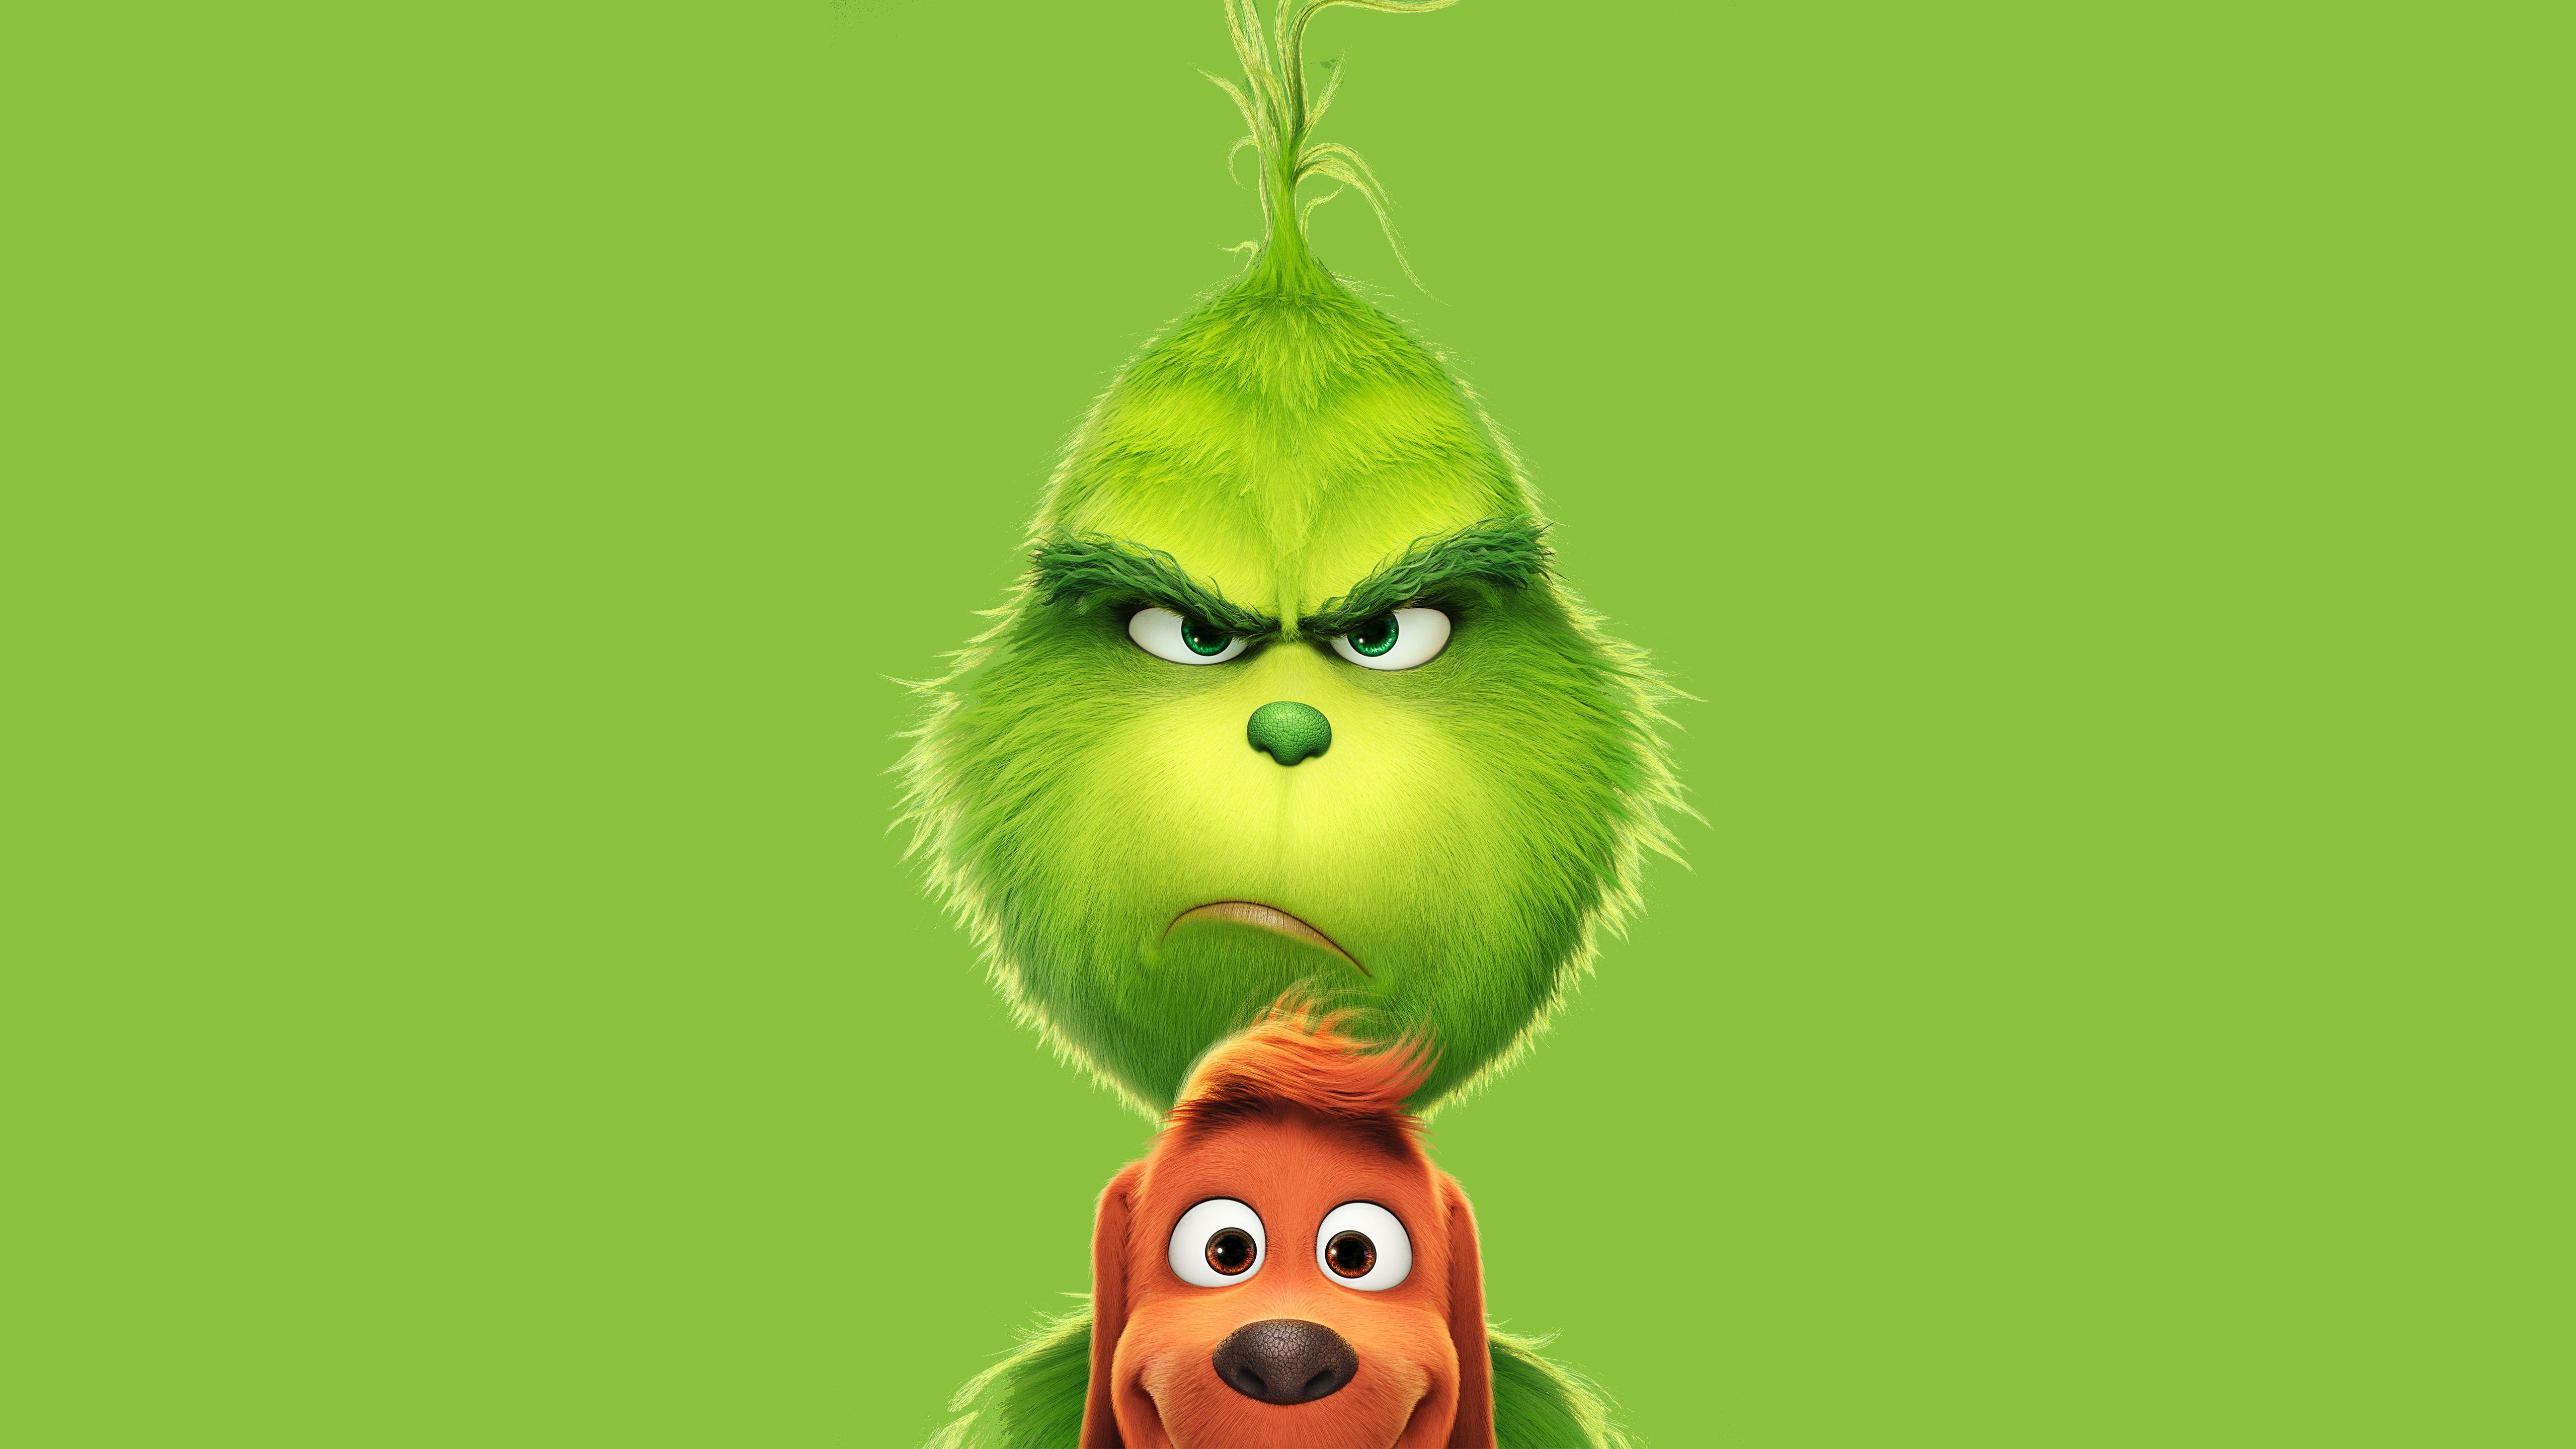 Wallpaper The Grinch, Animation, Comedy, 5K, Movies